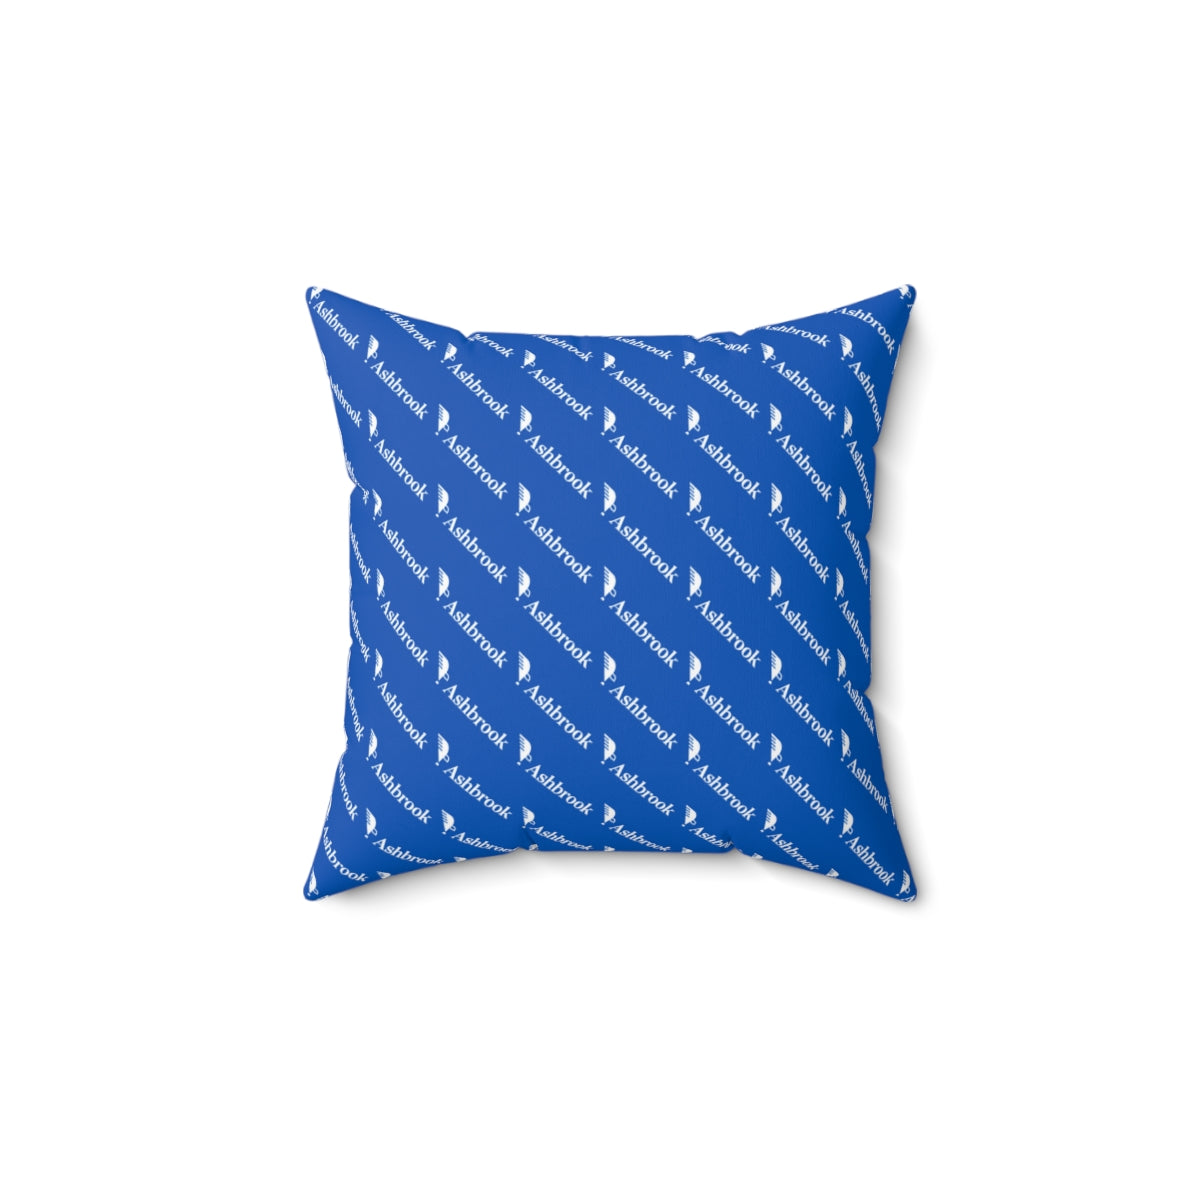 Spun Polyester Square Pillow with Repeating Logo